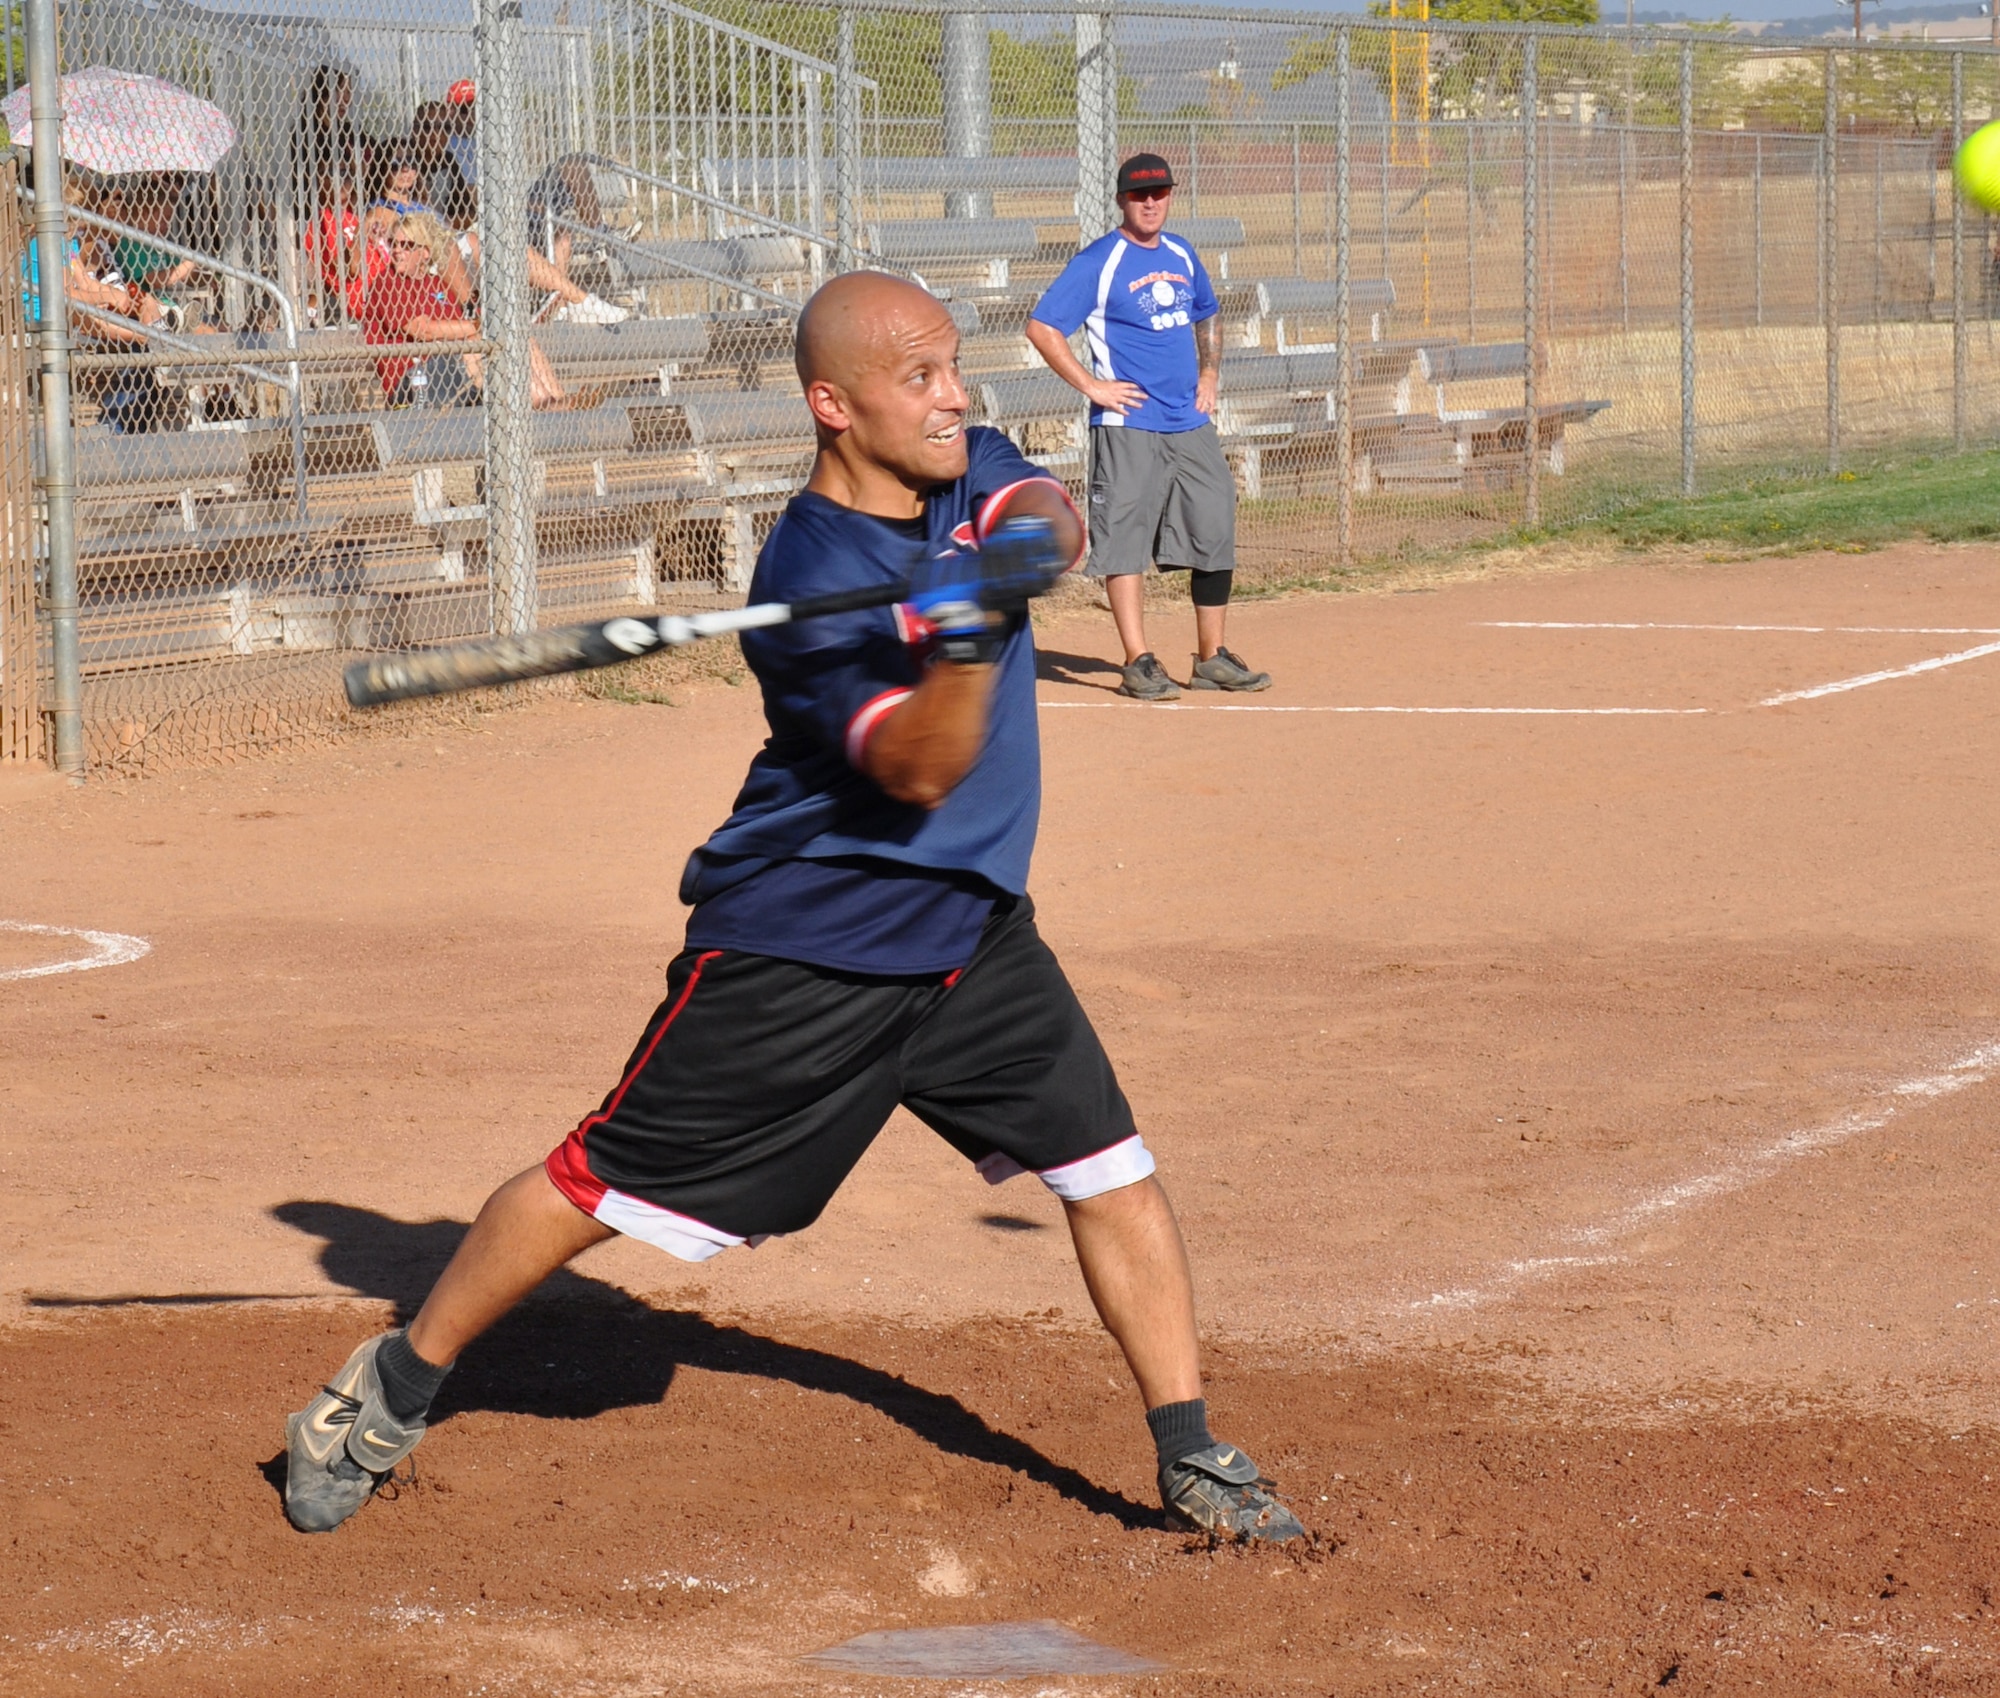 Staff Sgt. Erick Bran, 9th Maintenance Squadron, swings at a pitch during Beale’s Intramural Softball Championships at Beale Air Force Base, Calif., Aug. 16, 2012. The 9th MXS defeated 9th Munitions Squadron with a 10-9 victory. (U.S Air Force photo by Staff Sgt. Robert M. Trujillo)